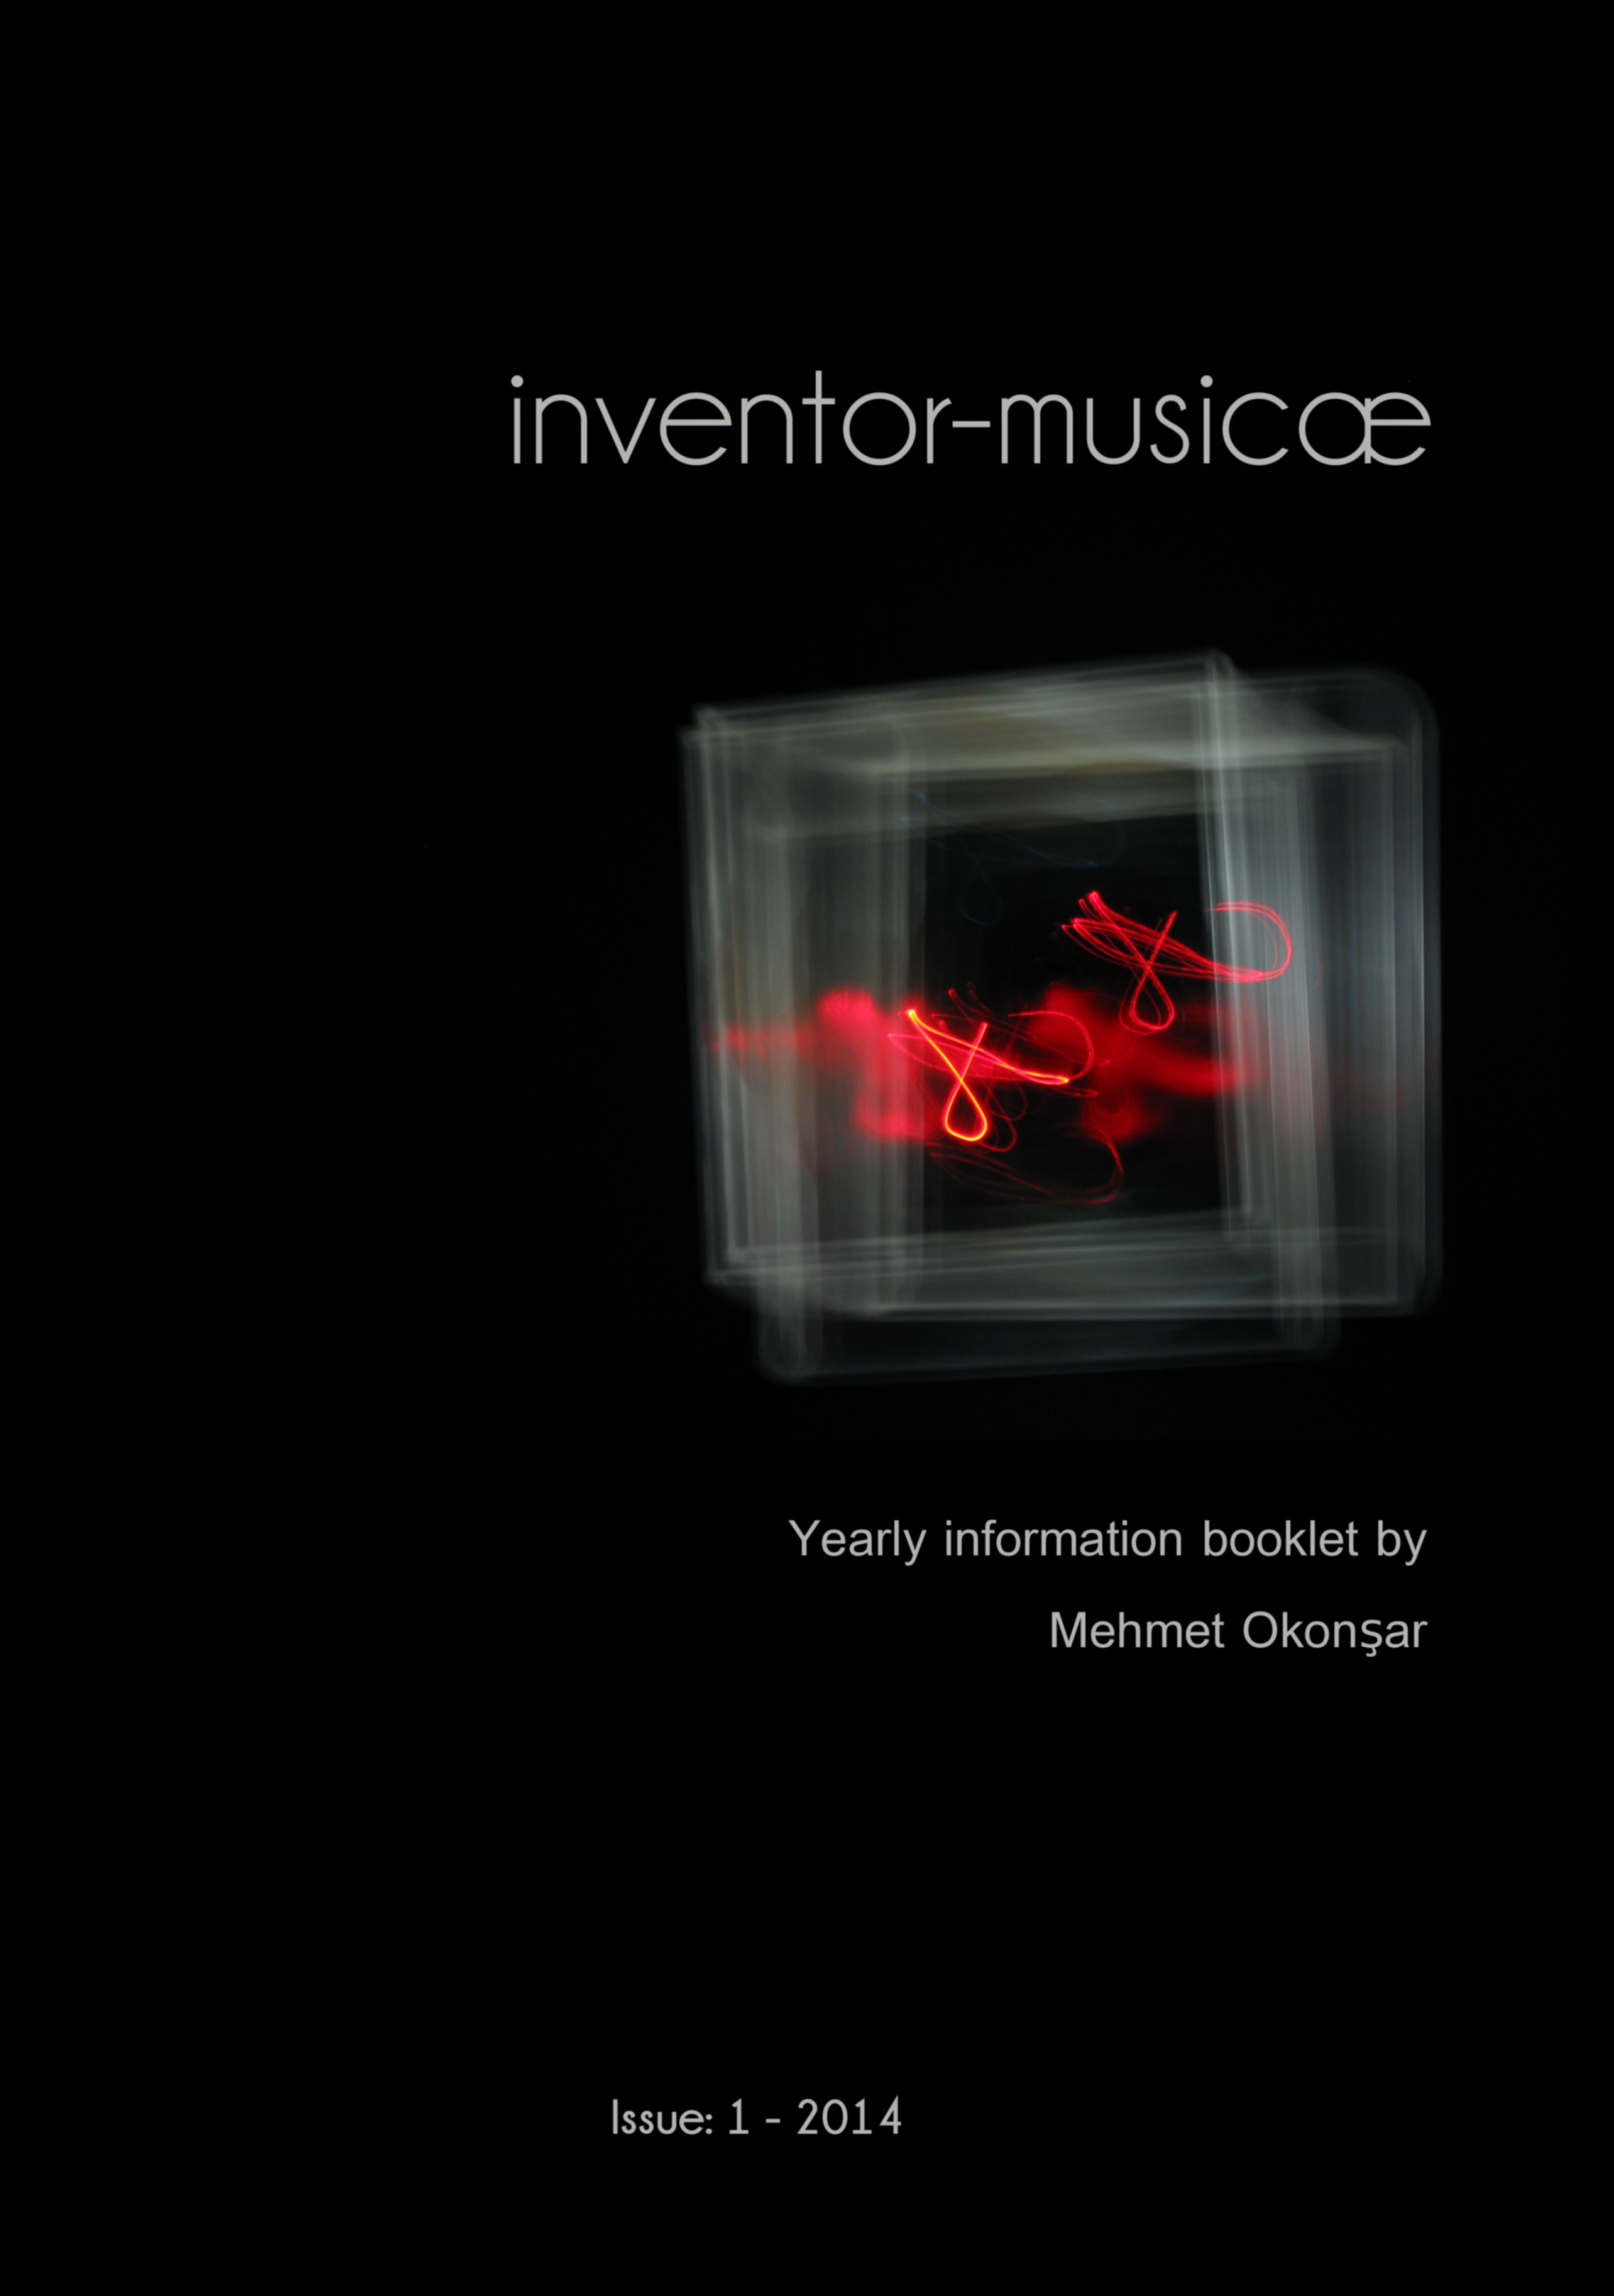 images/Covers/Inventor-Musicae-PublishingCoverImage.jpg